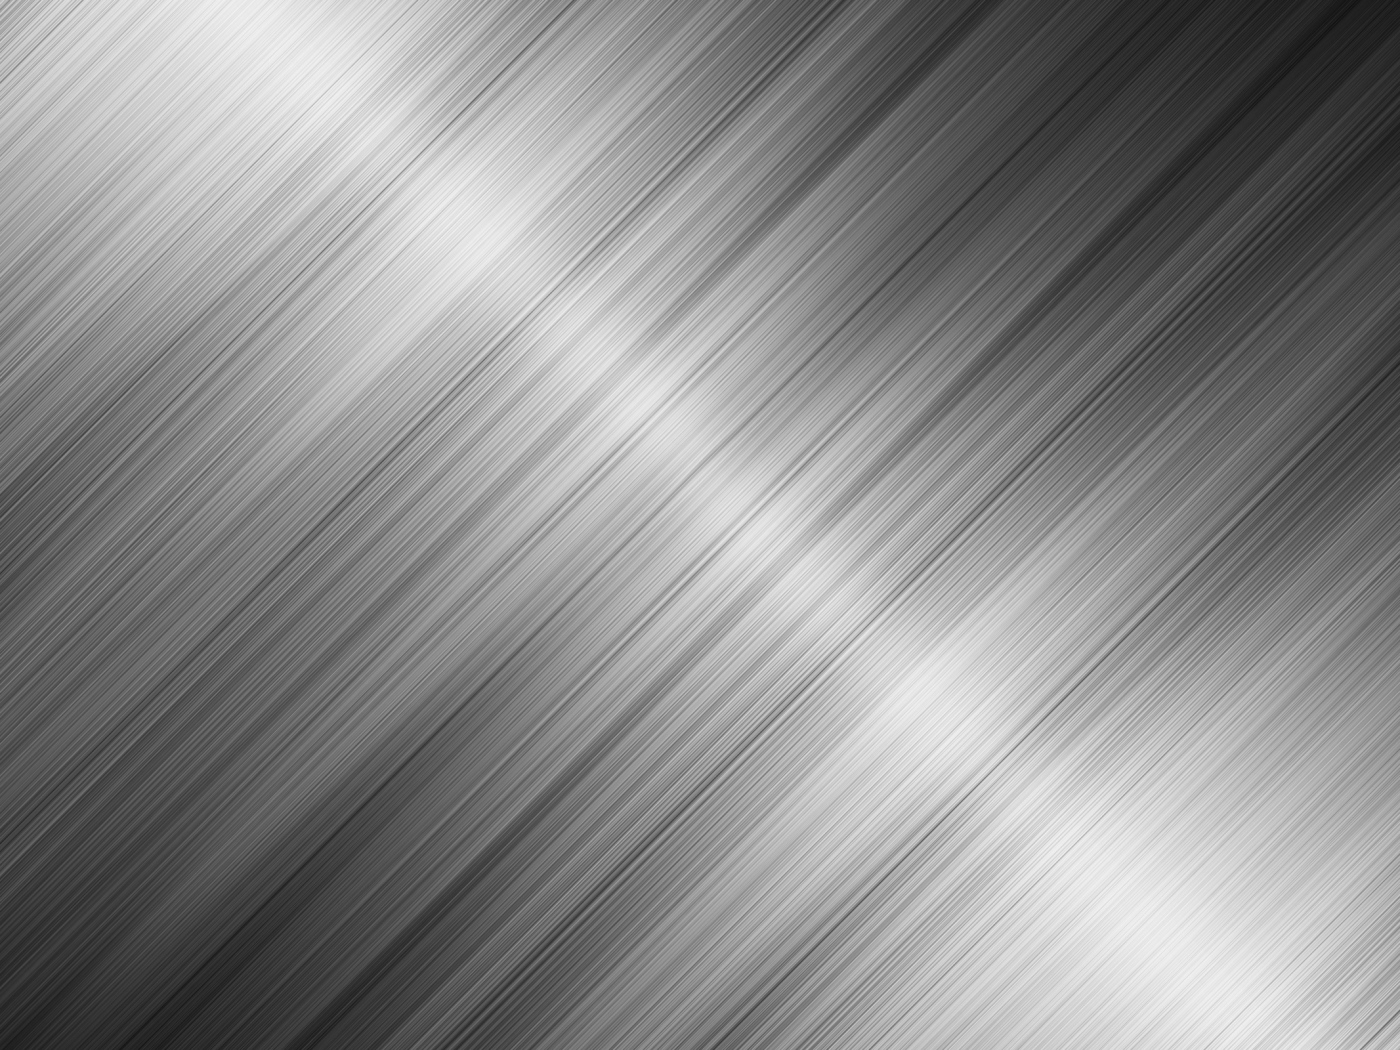 abstract style hd image